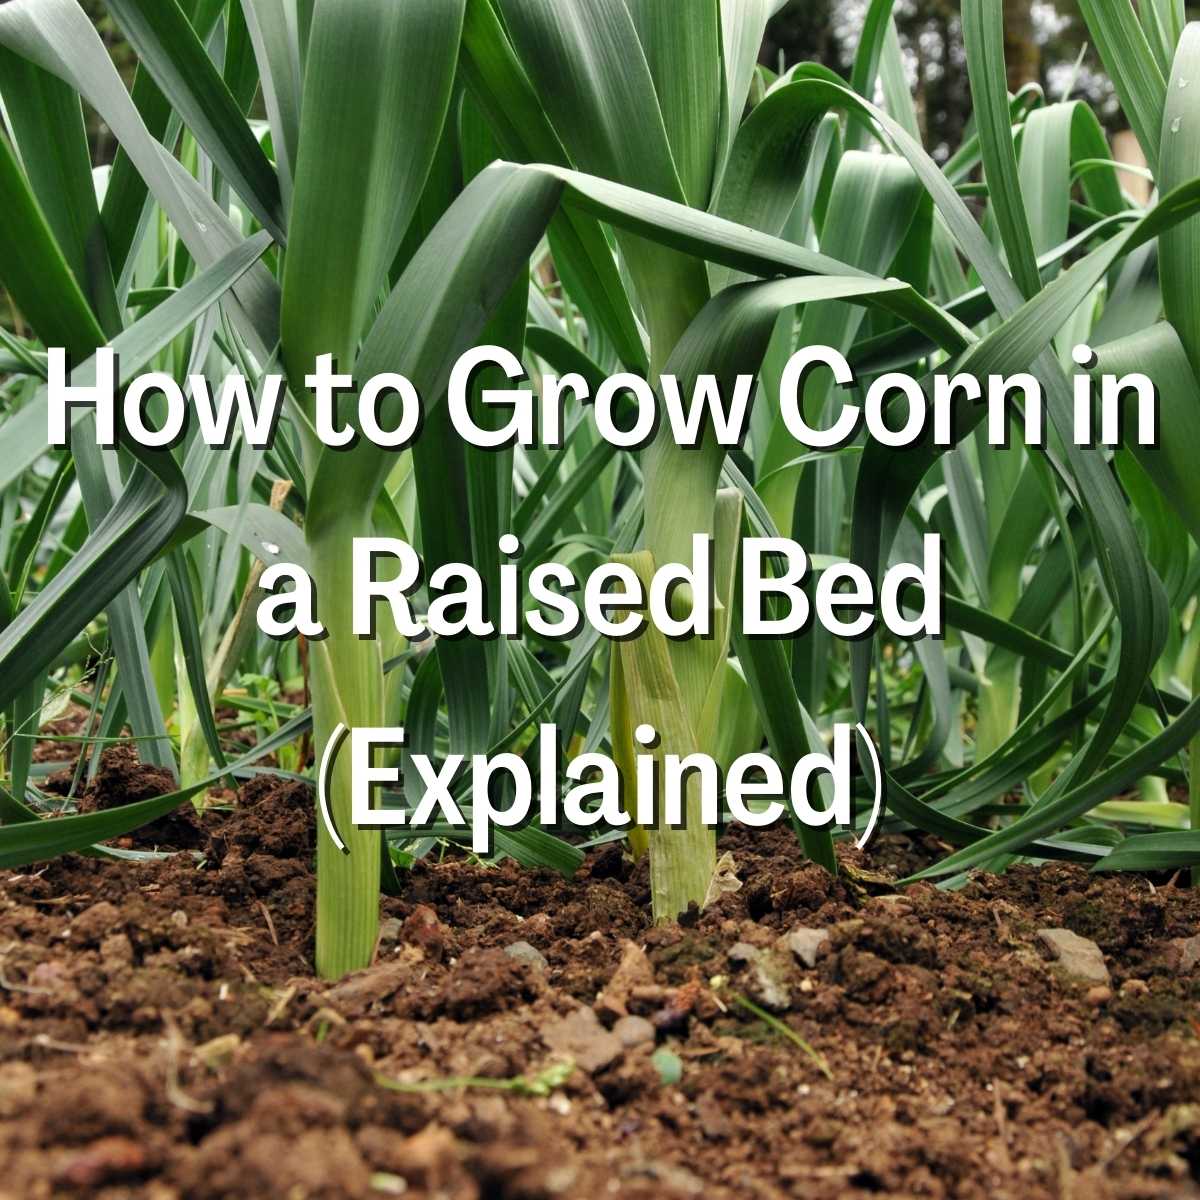 Grow Corn in a Raised Bed